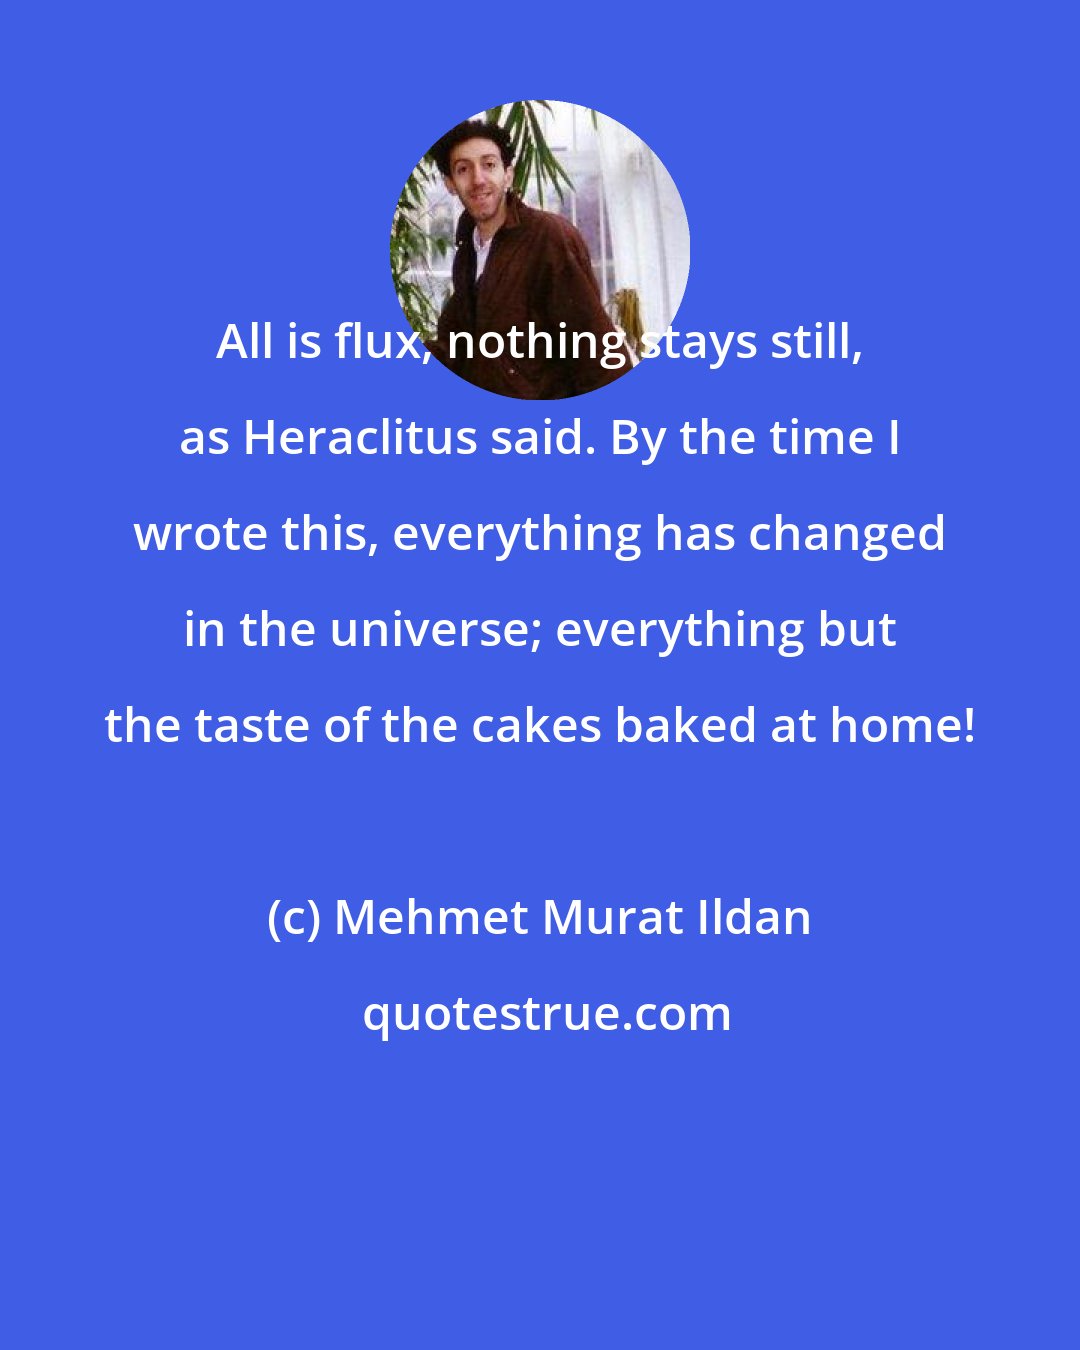 Mehmet Murat Ildan: All is flux, nothing stays still, as Heraclitus said. By the time I wrote this, everything has changed in the universe; everything but the taste of the cakes baked at home!